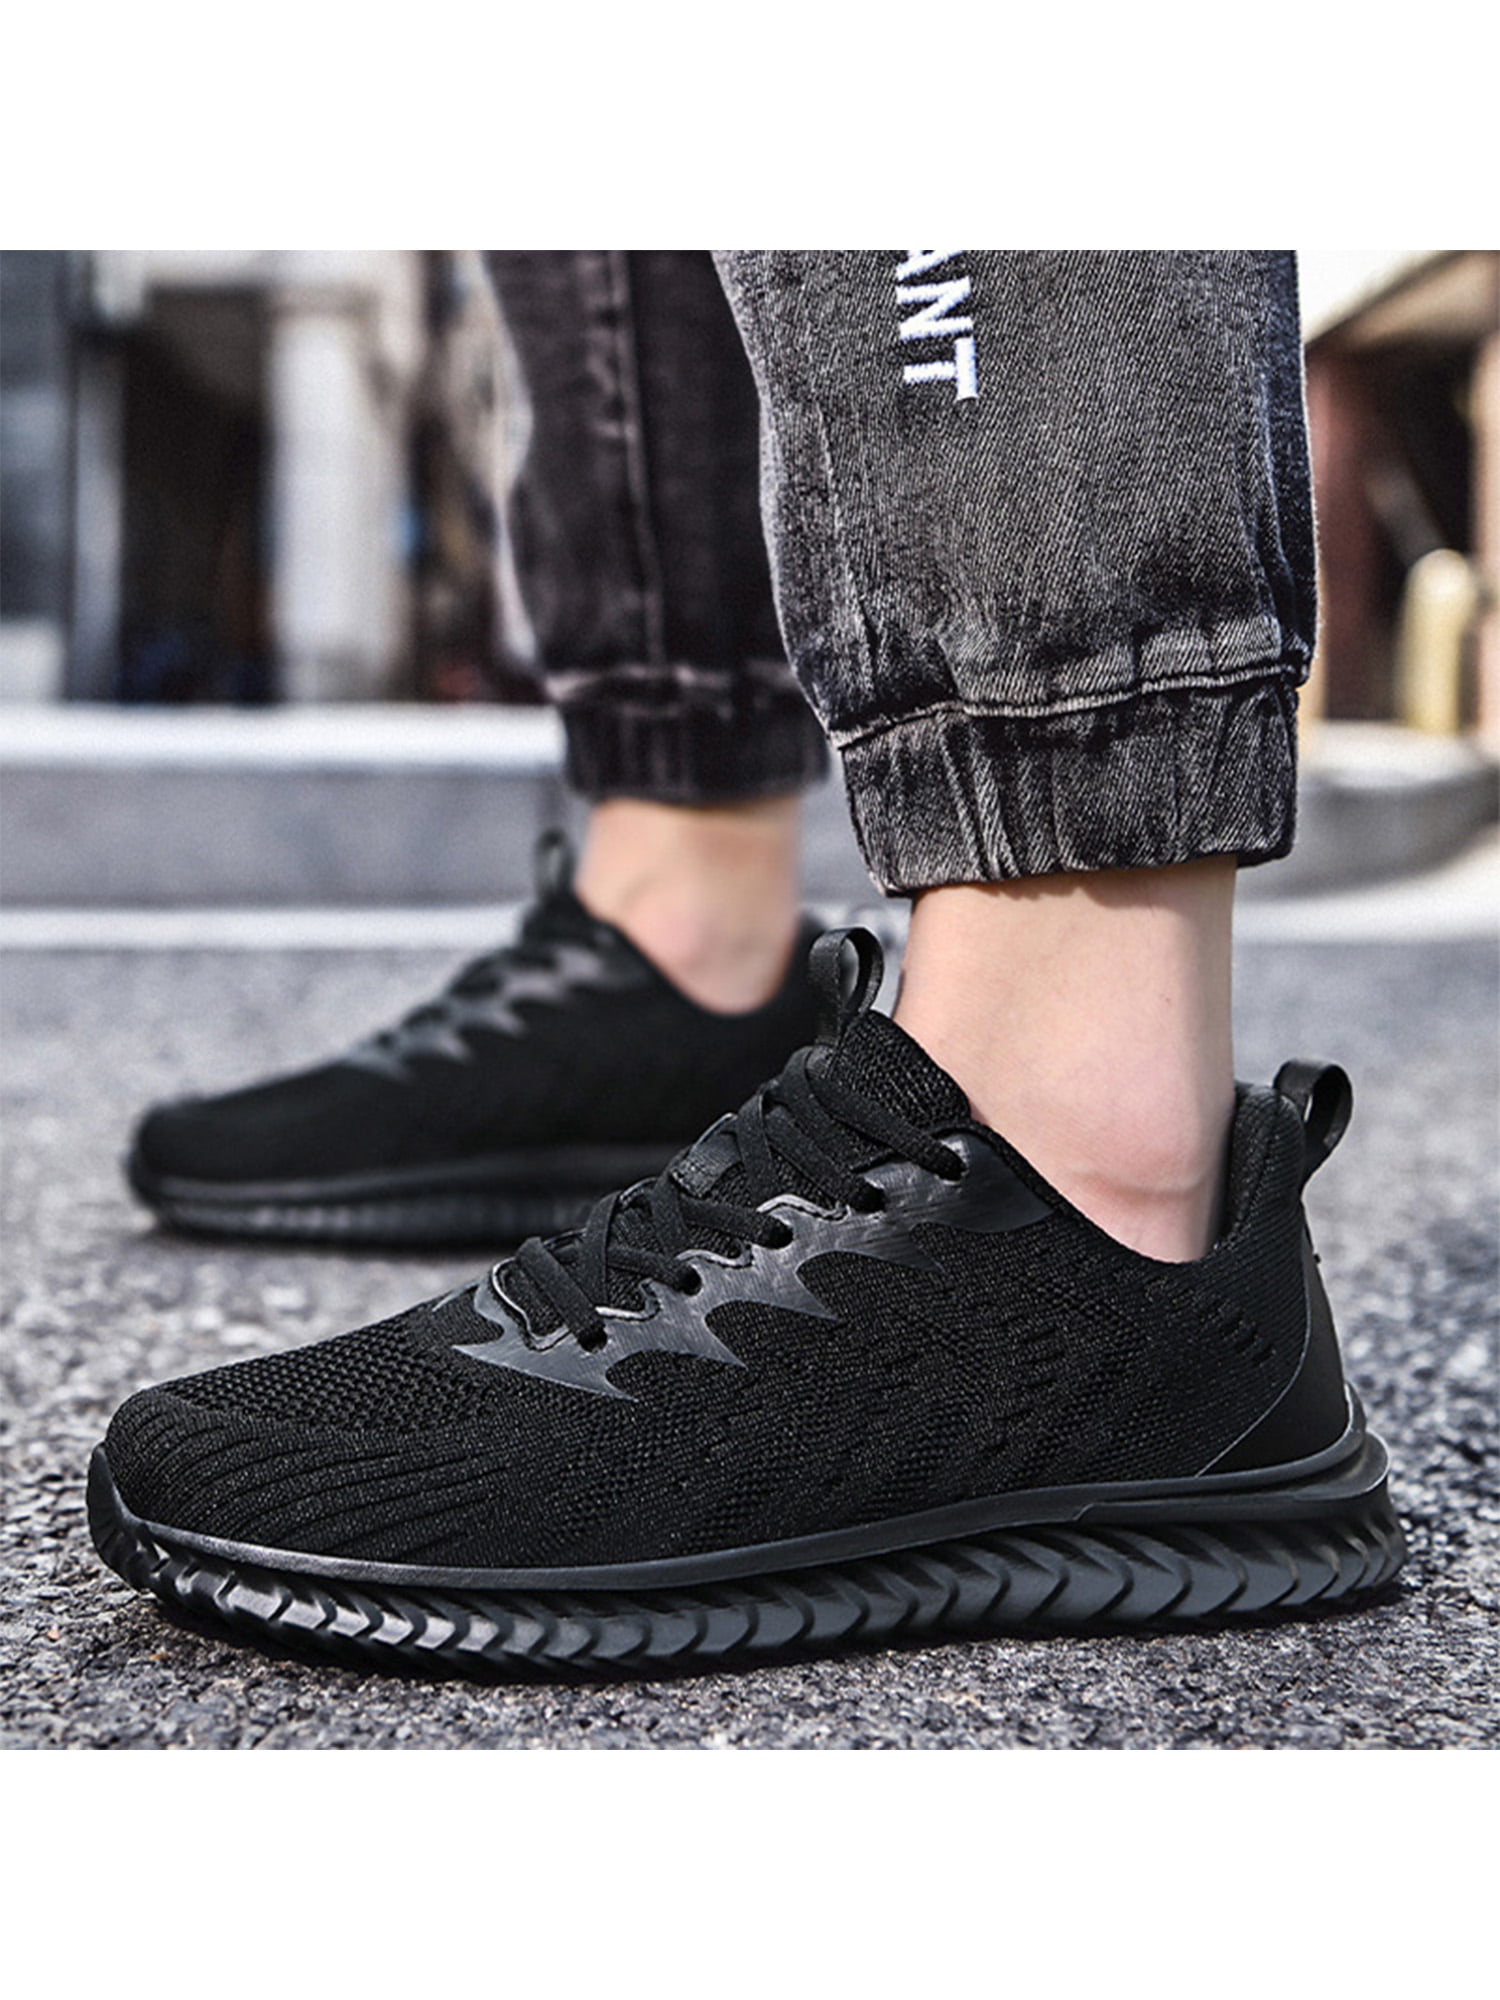 Men Running Fitness Gym Trainer Sports Shoes Casual Breathable Athletic Sneakers 